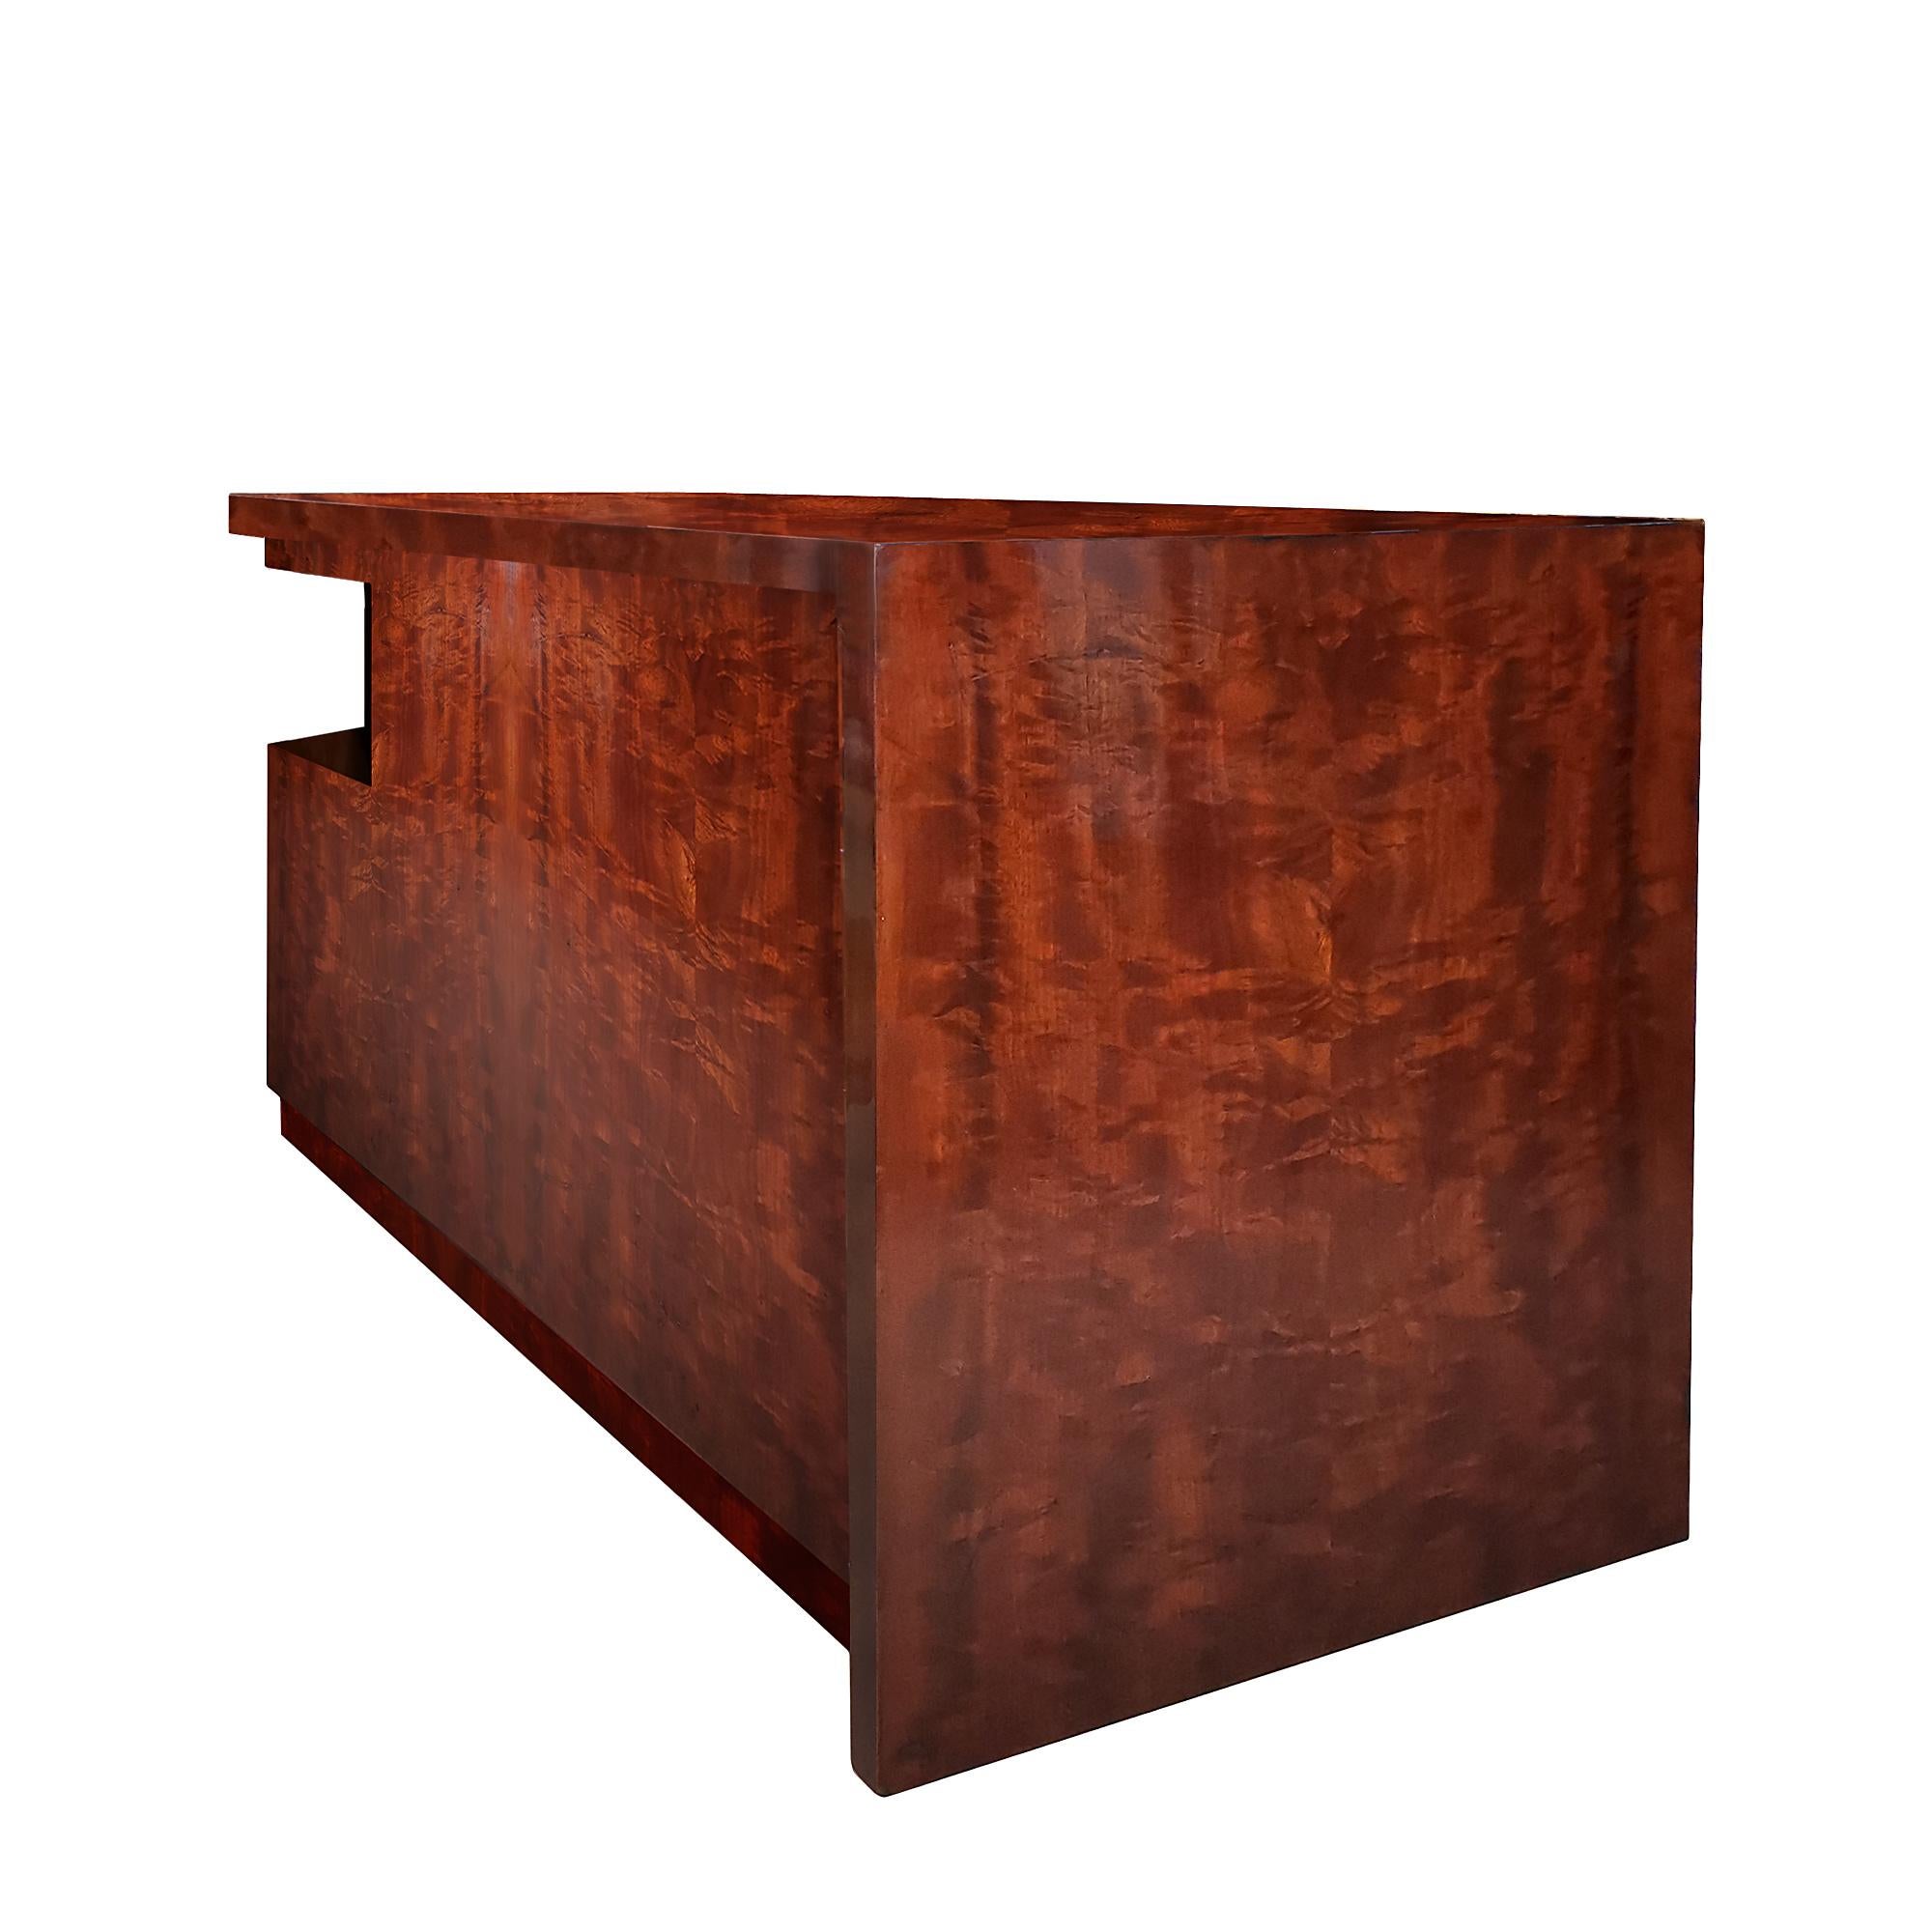 Cubist Art Deco Desk in Mahogany - Barcelona, 1930 In Good Condition For Sale In Girona, ES